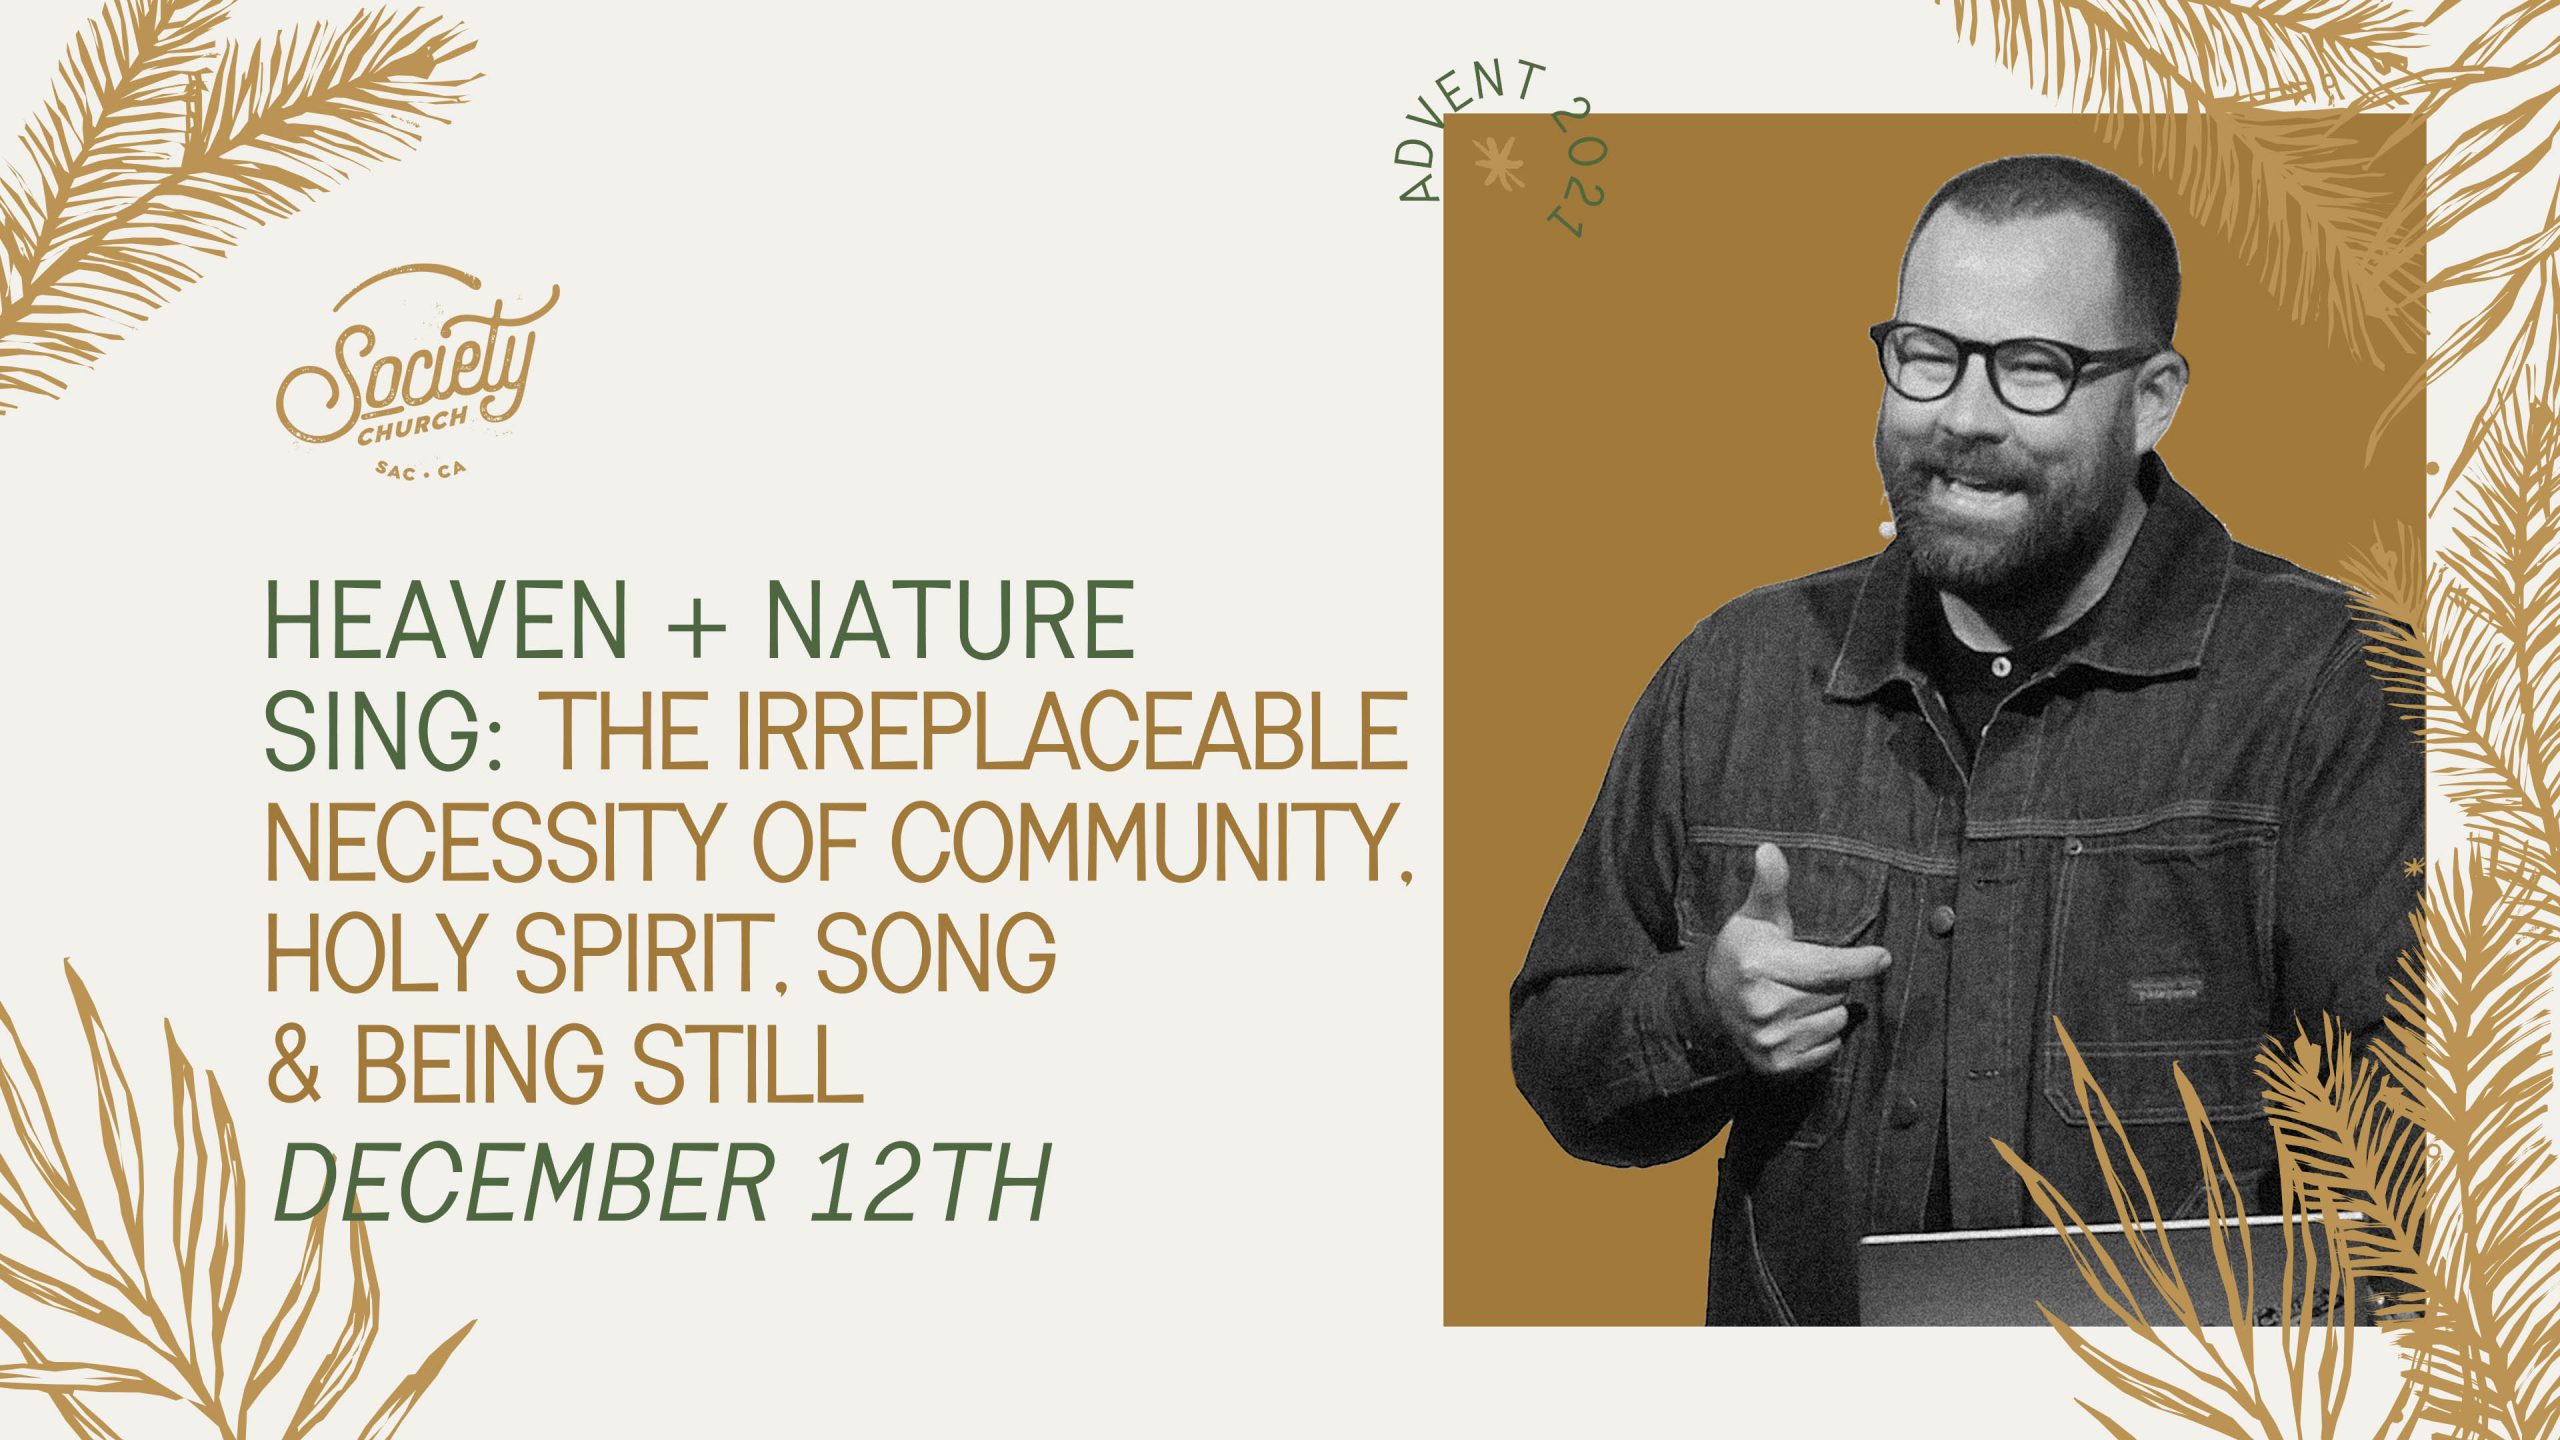 Heaven + Nature Sing: The Irreplaceable Necessity of Community, Holy Spirit, Song & Being Still